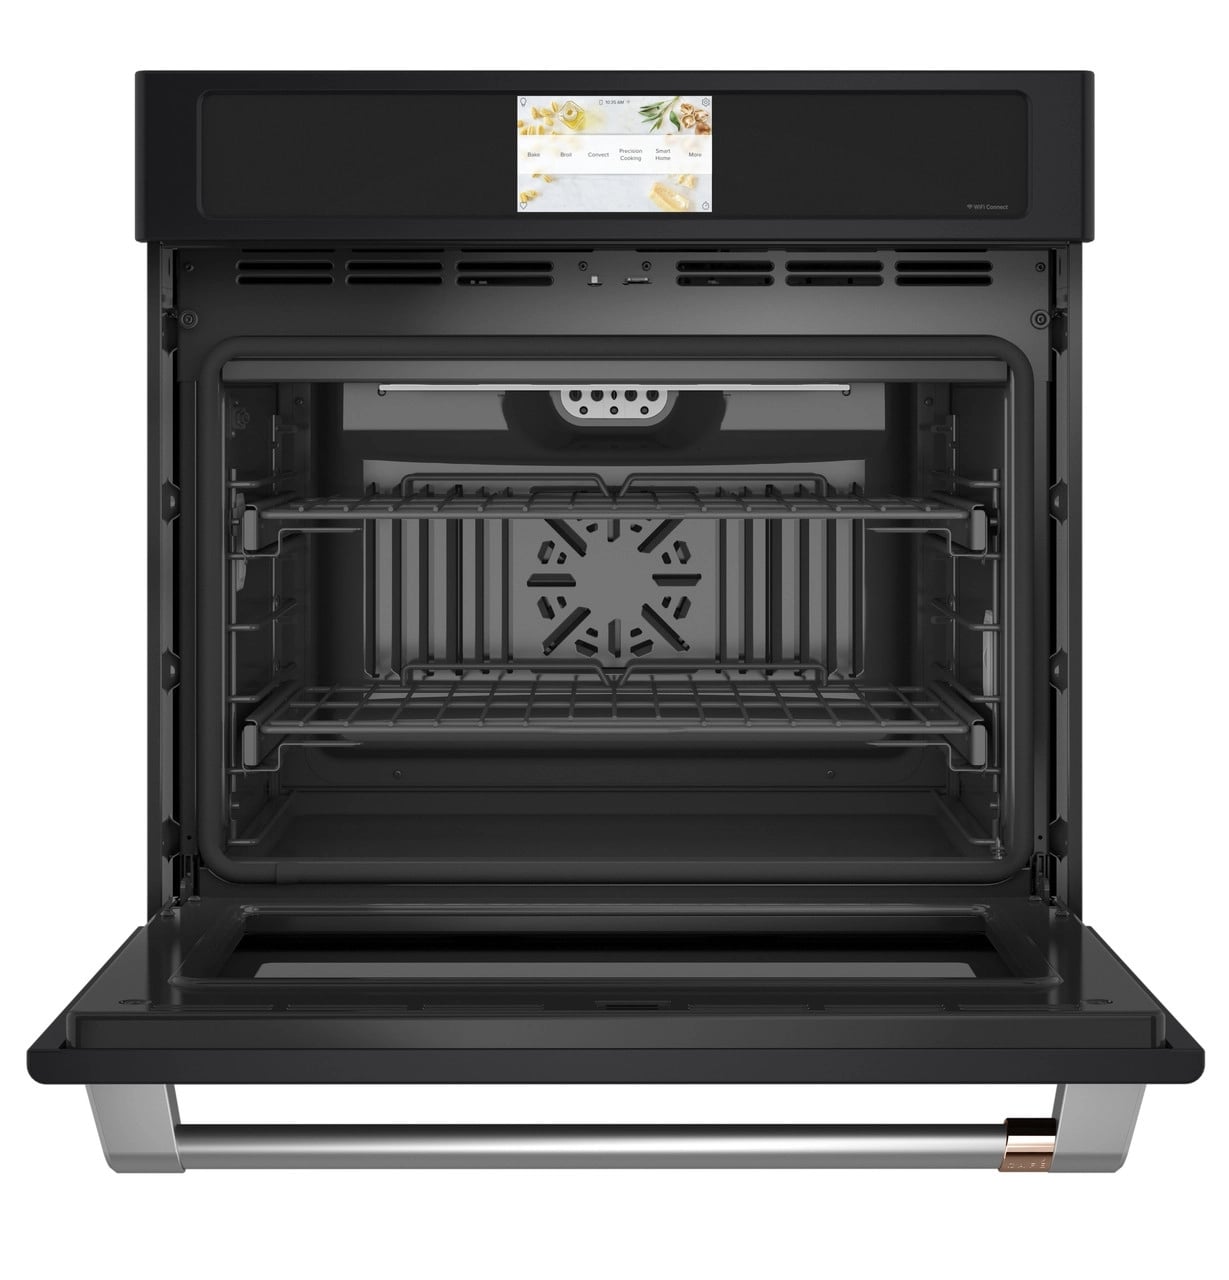 Café - 5 cu. ft Single Wall Oven in Black - CTS90DP3ND1